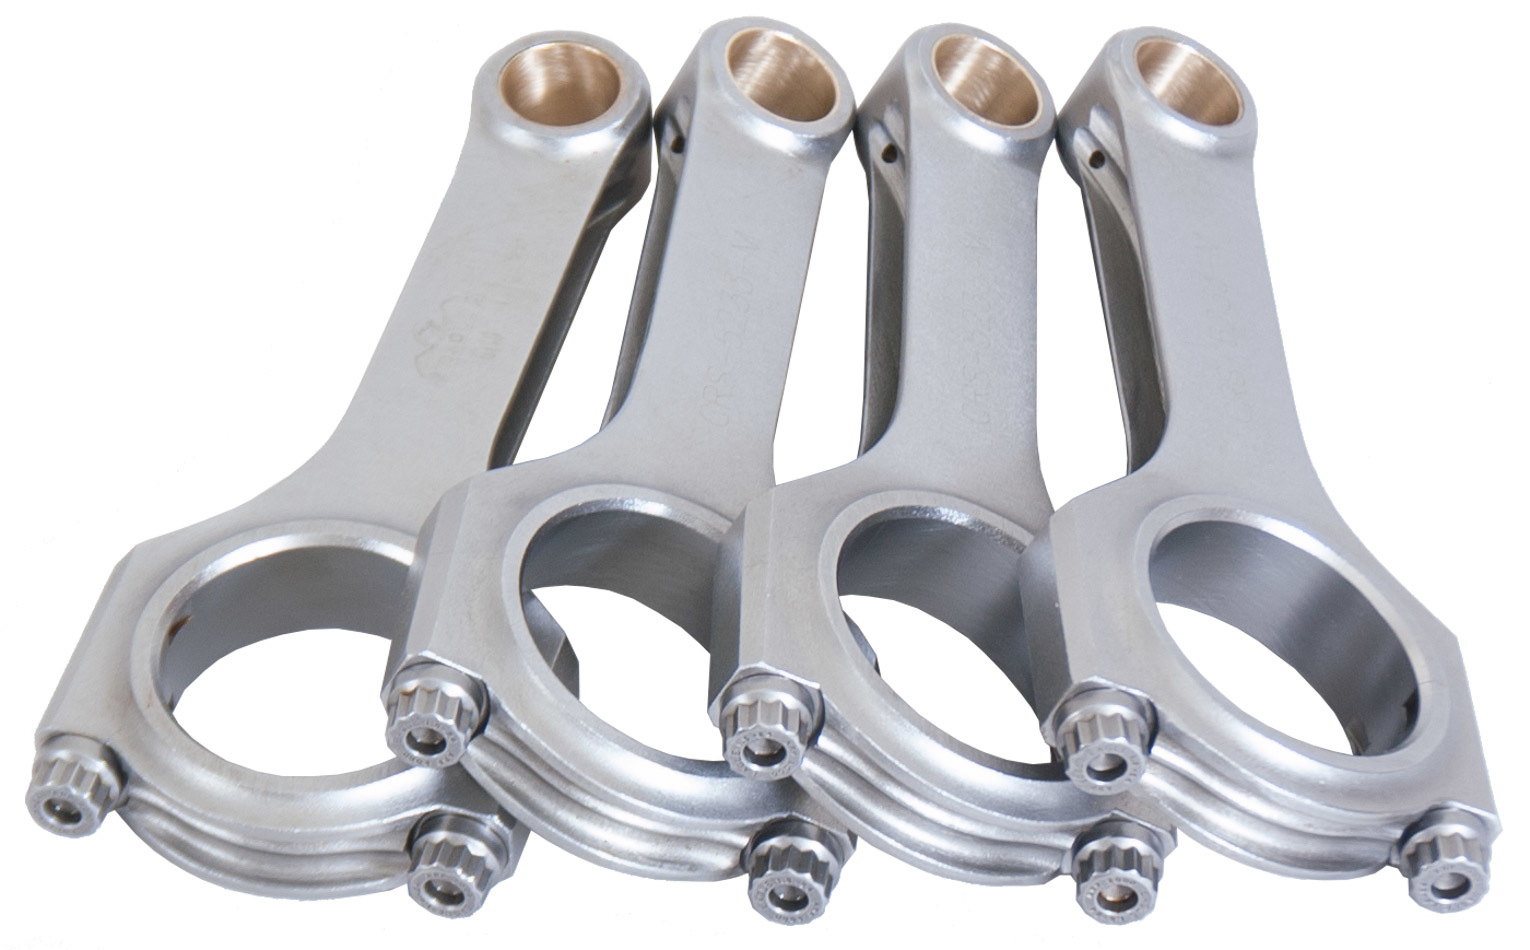 Eagle CRS5233M3D - Connecting Rod, H Beam, 5.233 in Long, Bushed, 3/8 in Cap Screws, Forged Steel, Mazda 4-Cylinder, Set of 4